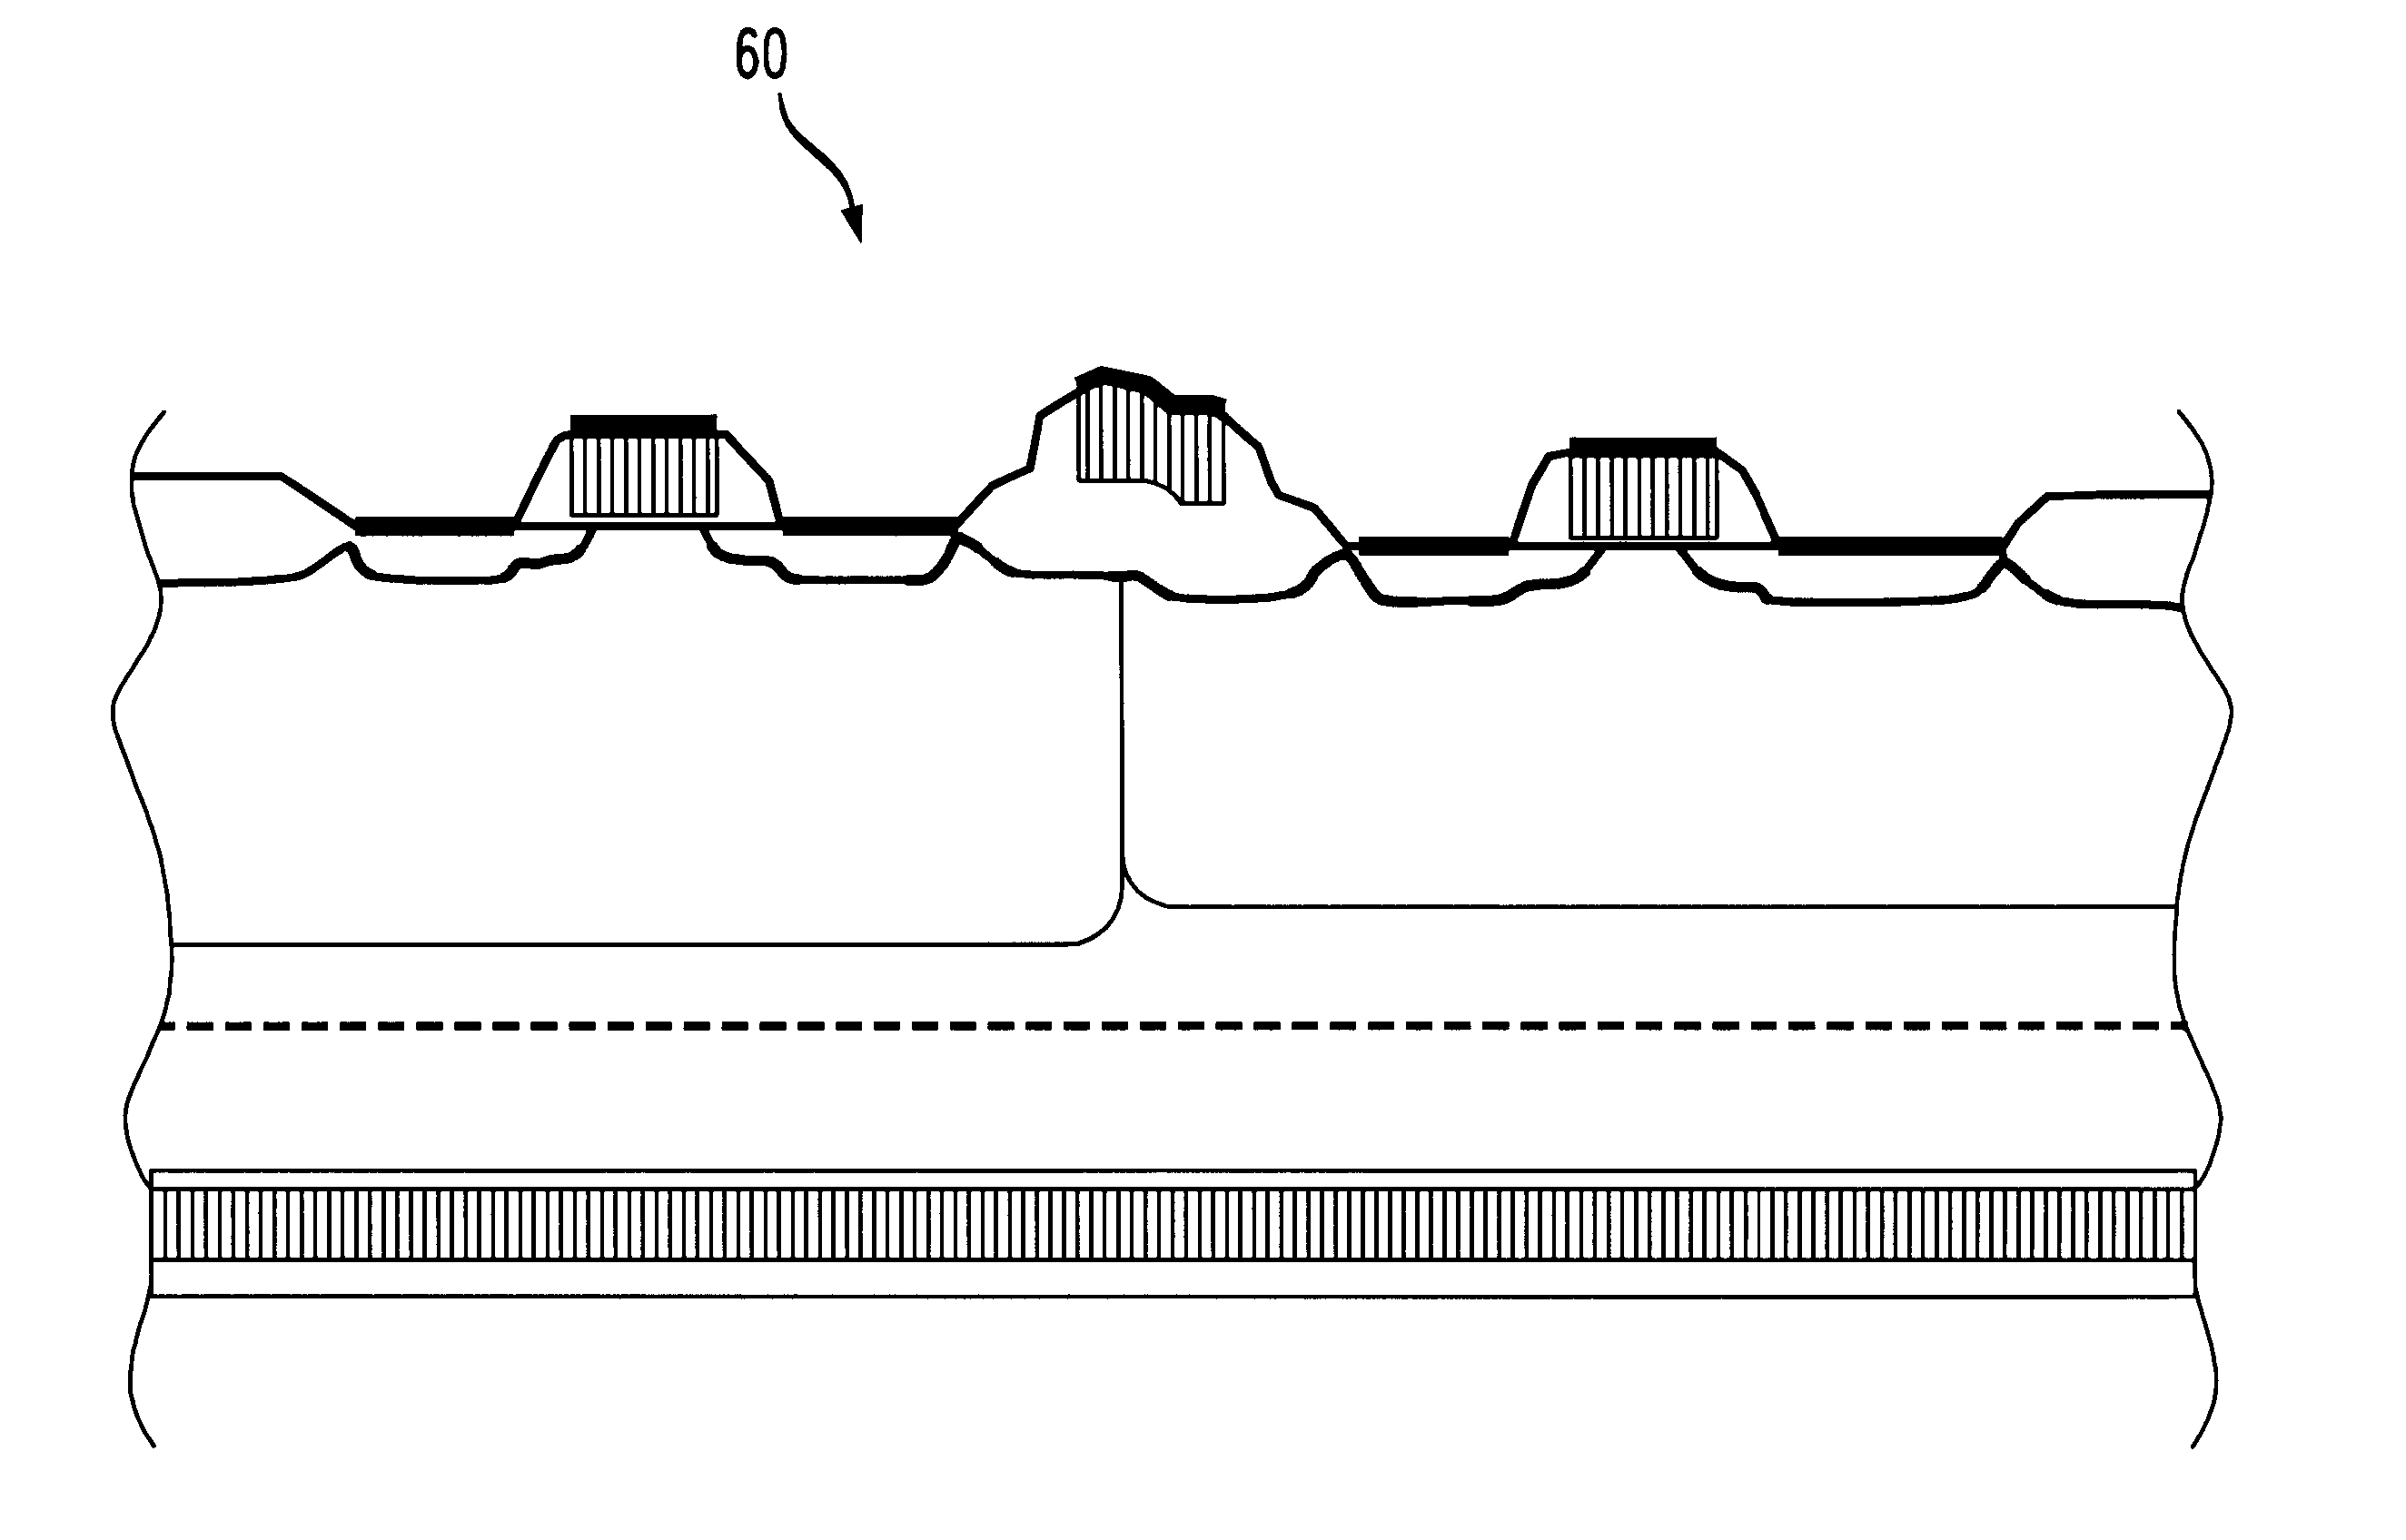 Method to selectively heat semiconductor wafers